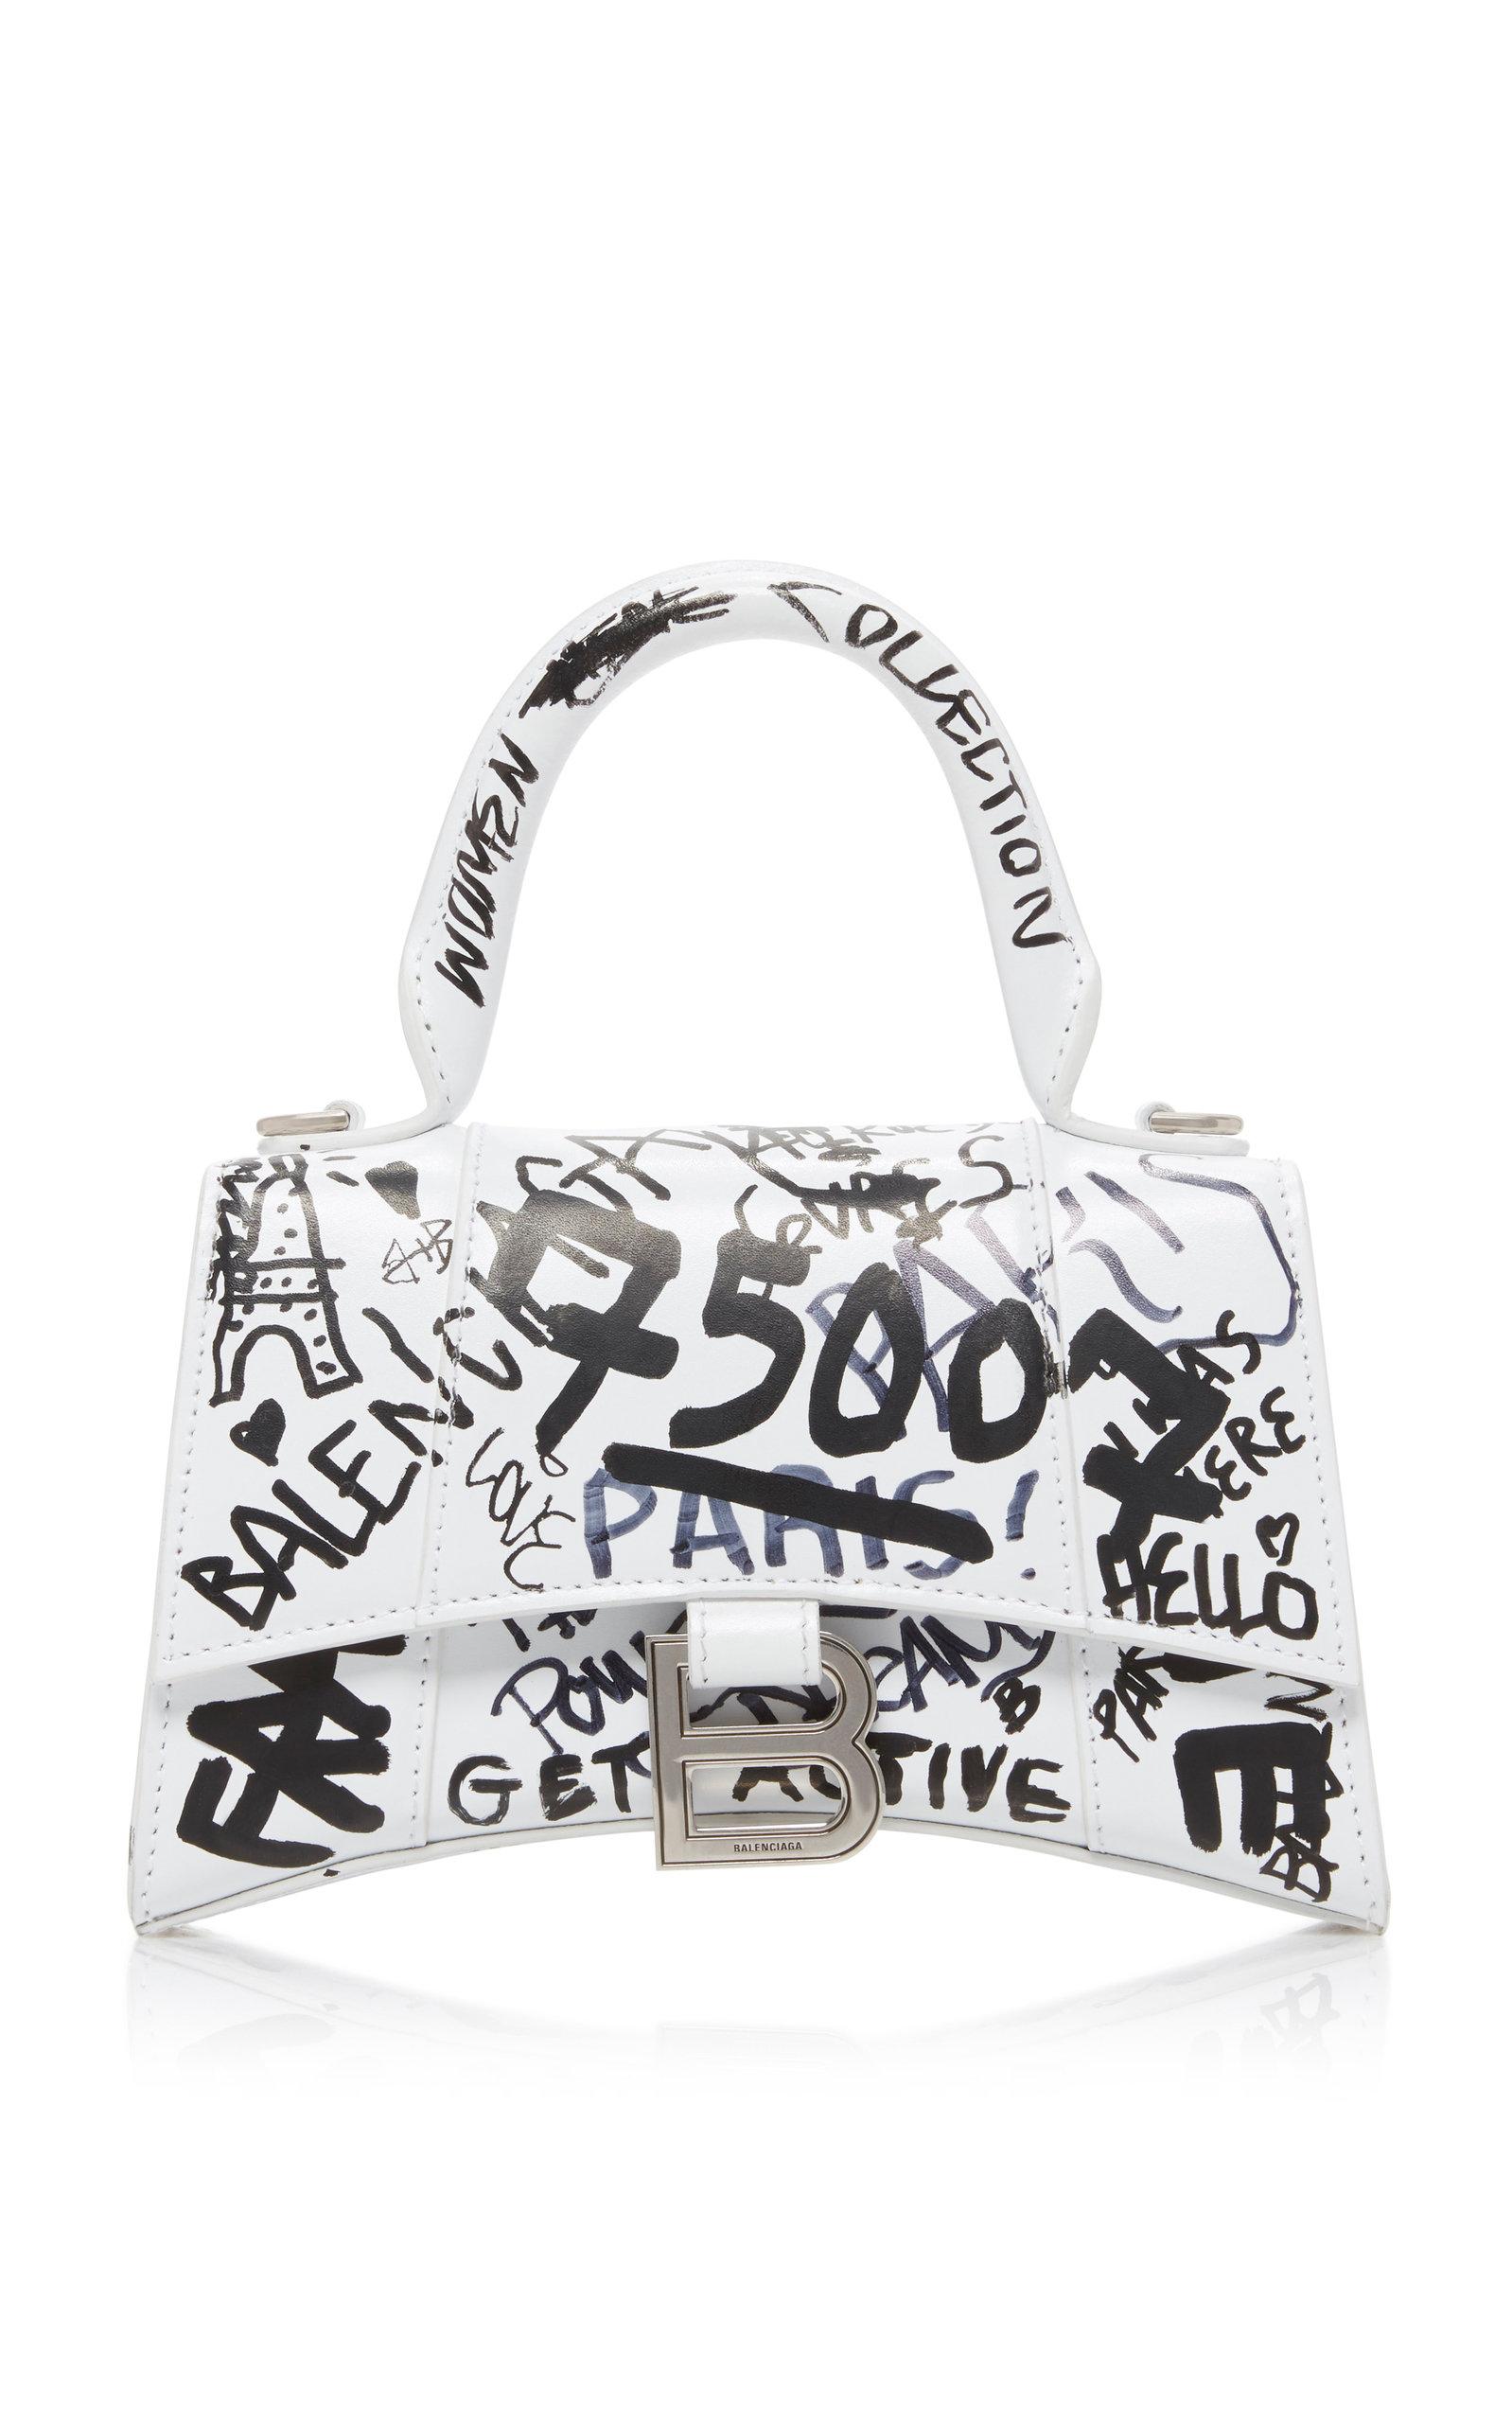 aanwijzing roltrap details Balenciaga Hourglass Xs Graffiti-print Leather Bag in White | Lyst